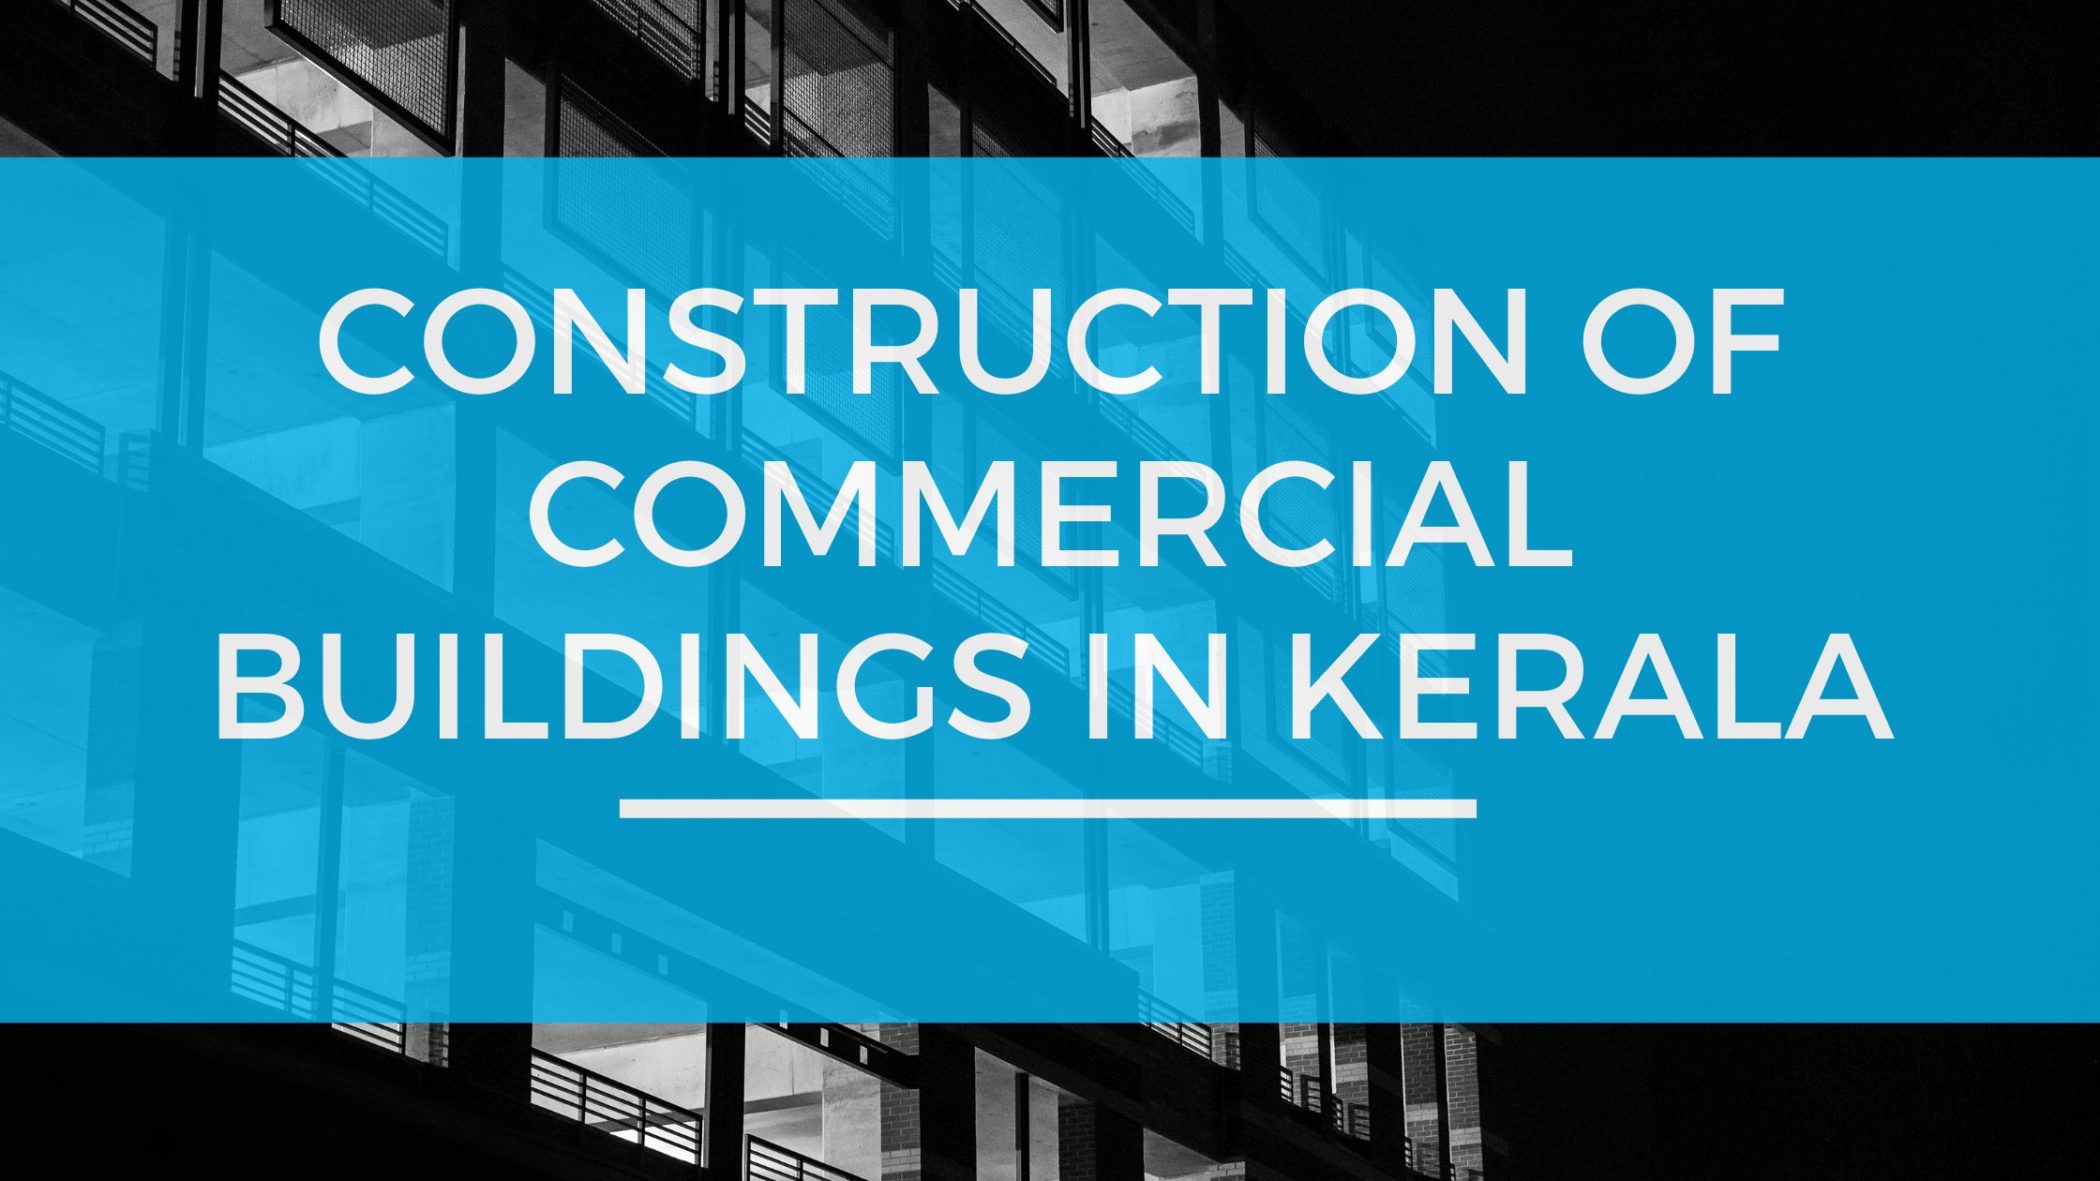 Construction of commercial buildings in Kerala